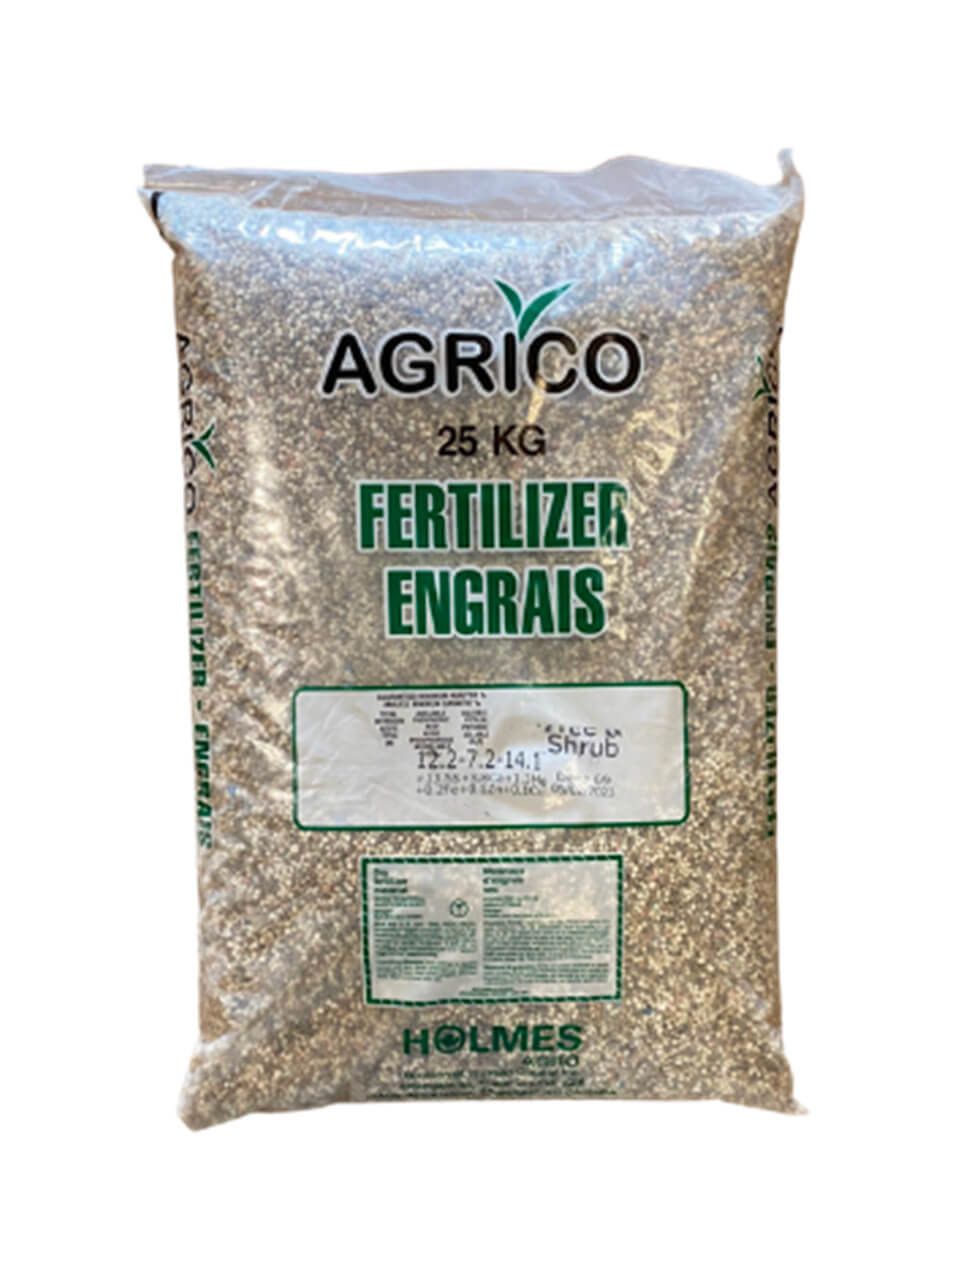 Agrico fertilizer for shrubs and trees